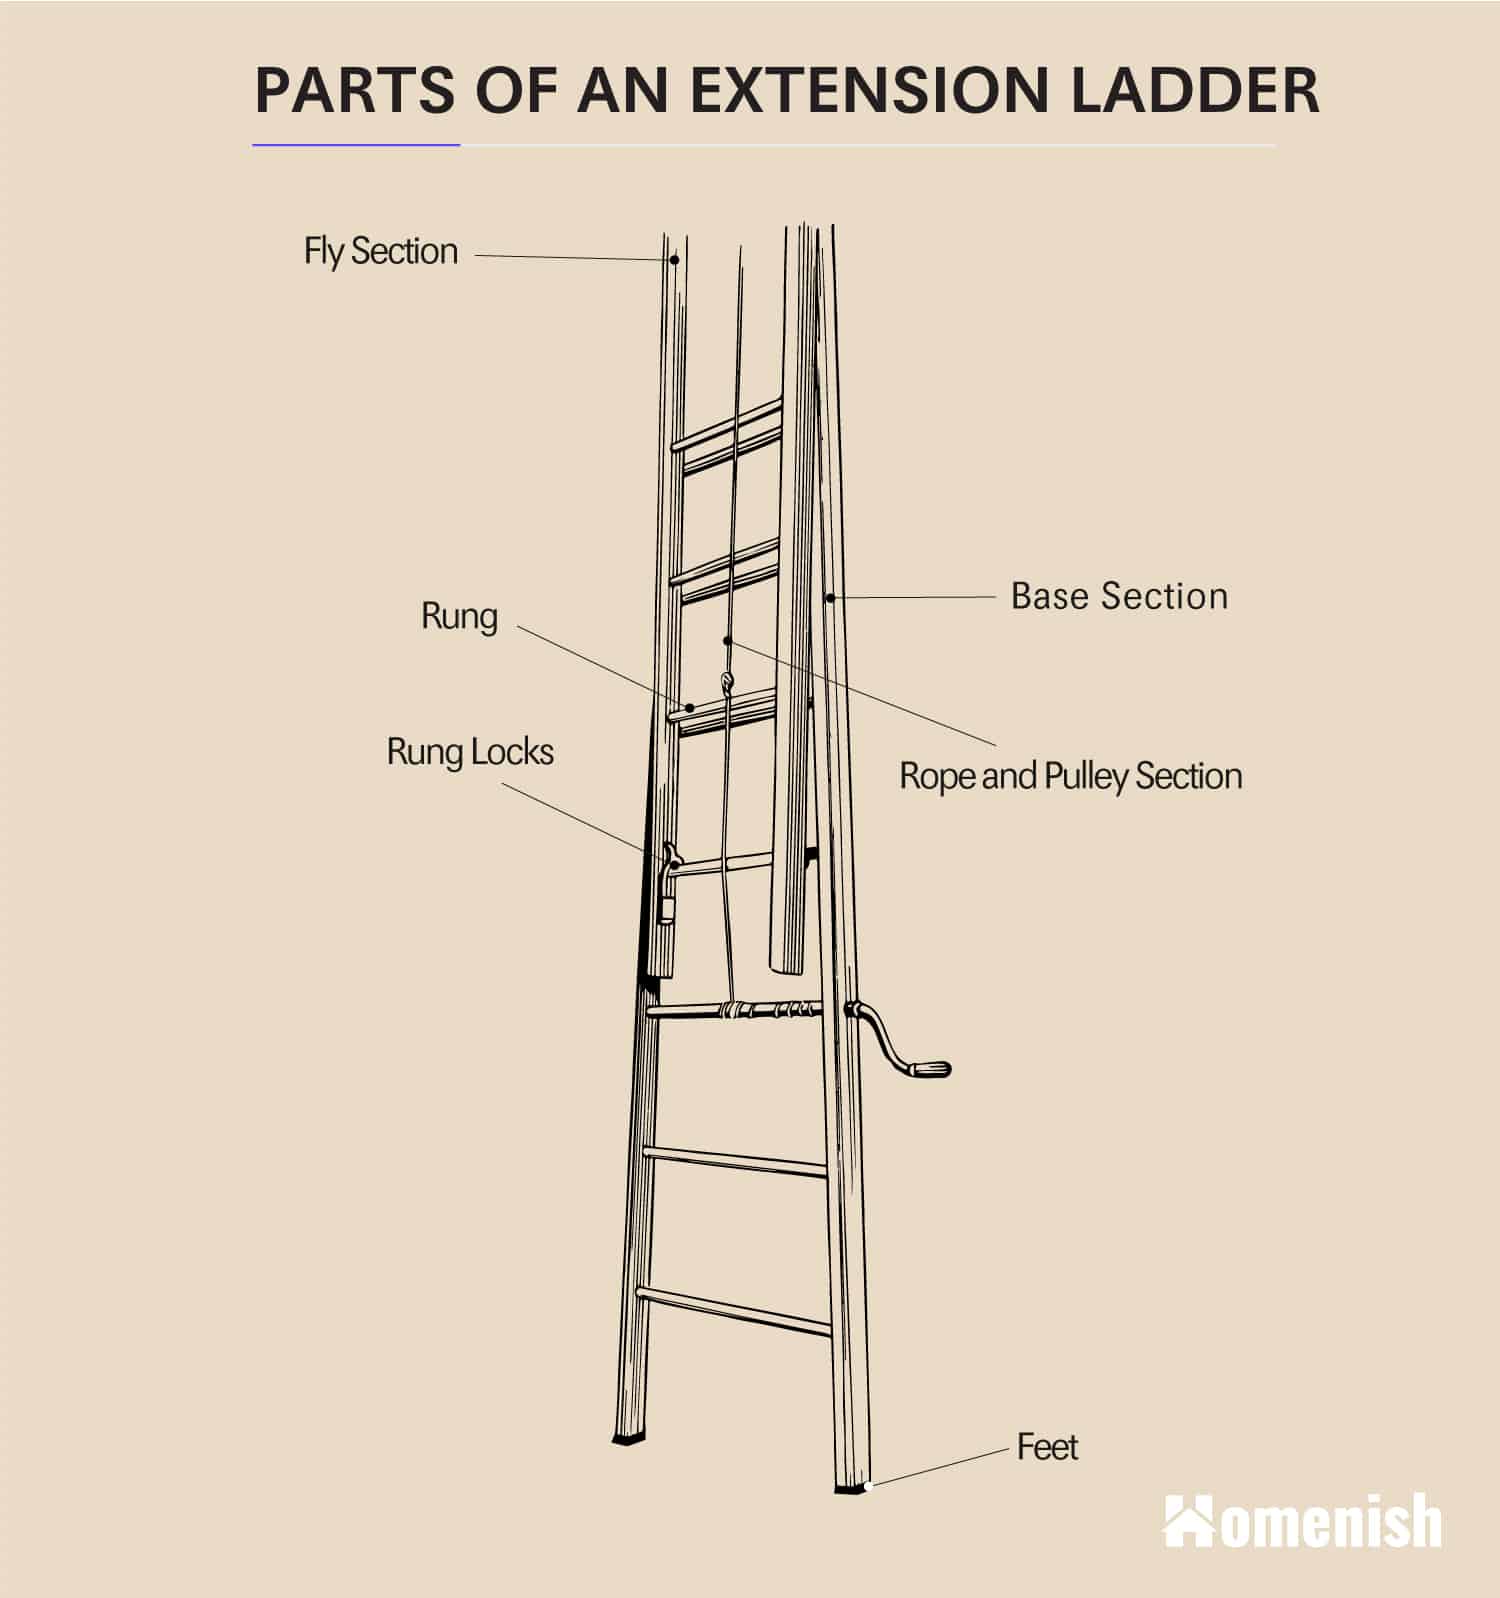 Parts of an Extension Ladder Diagram